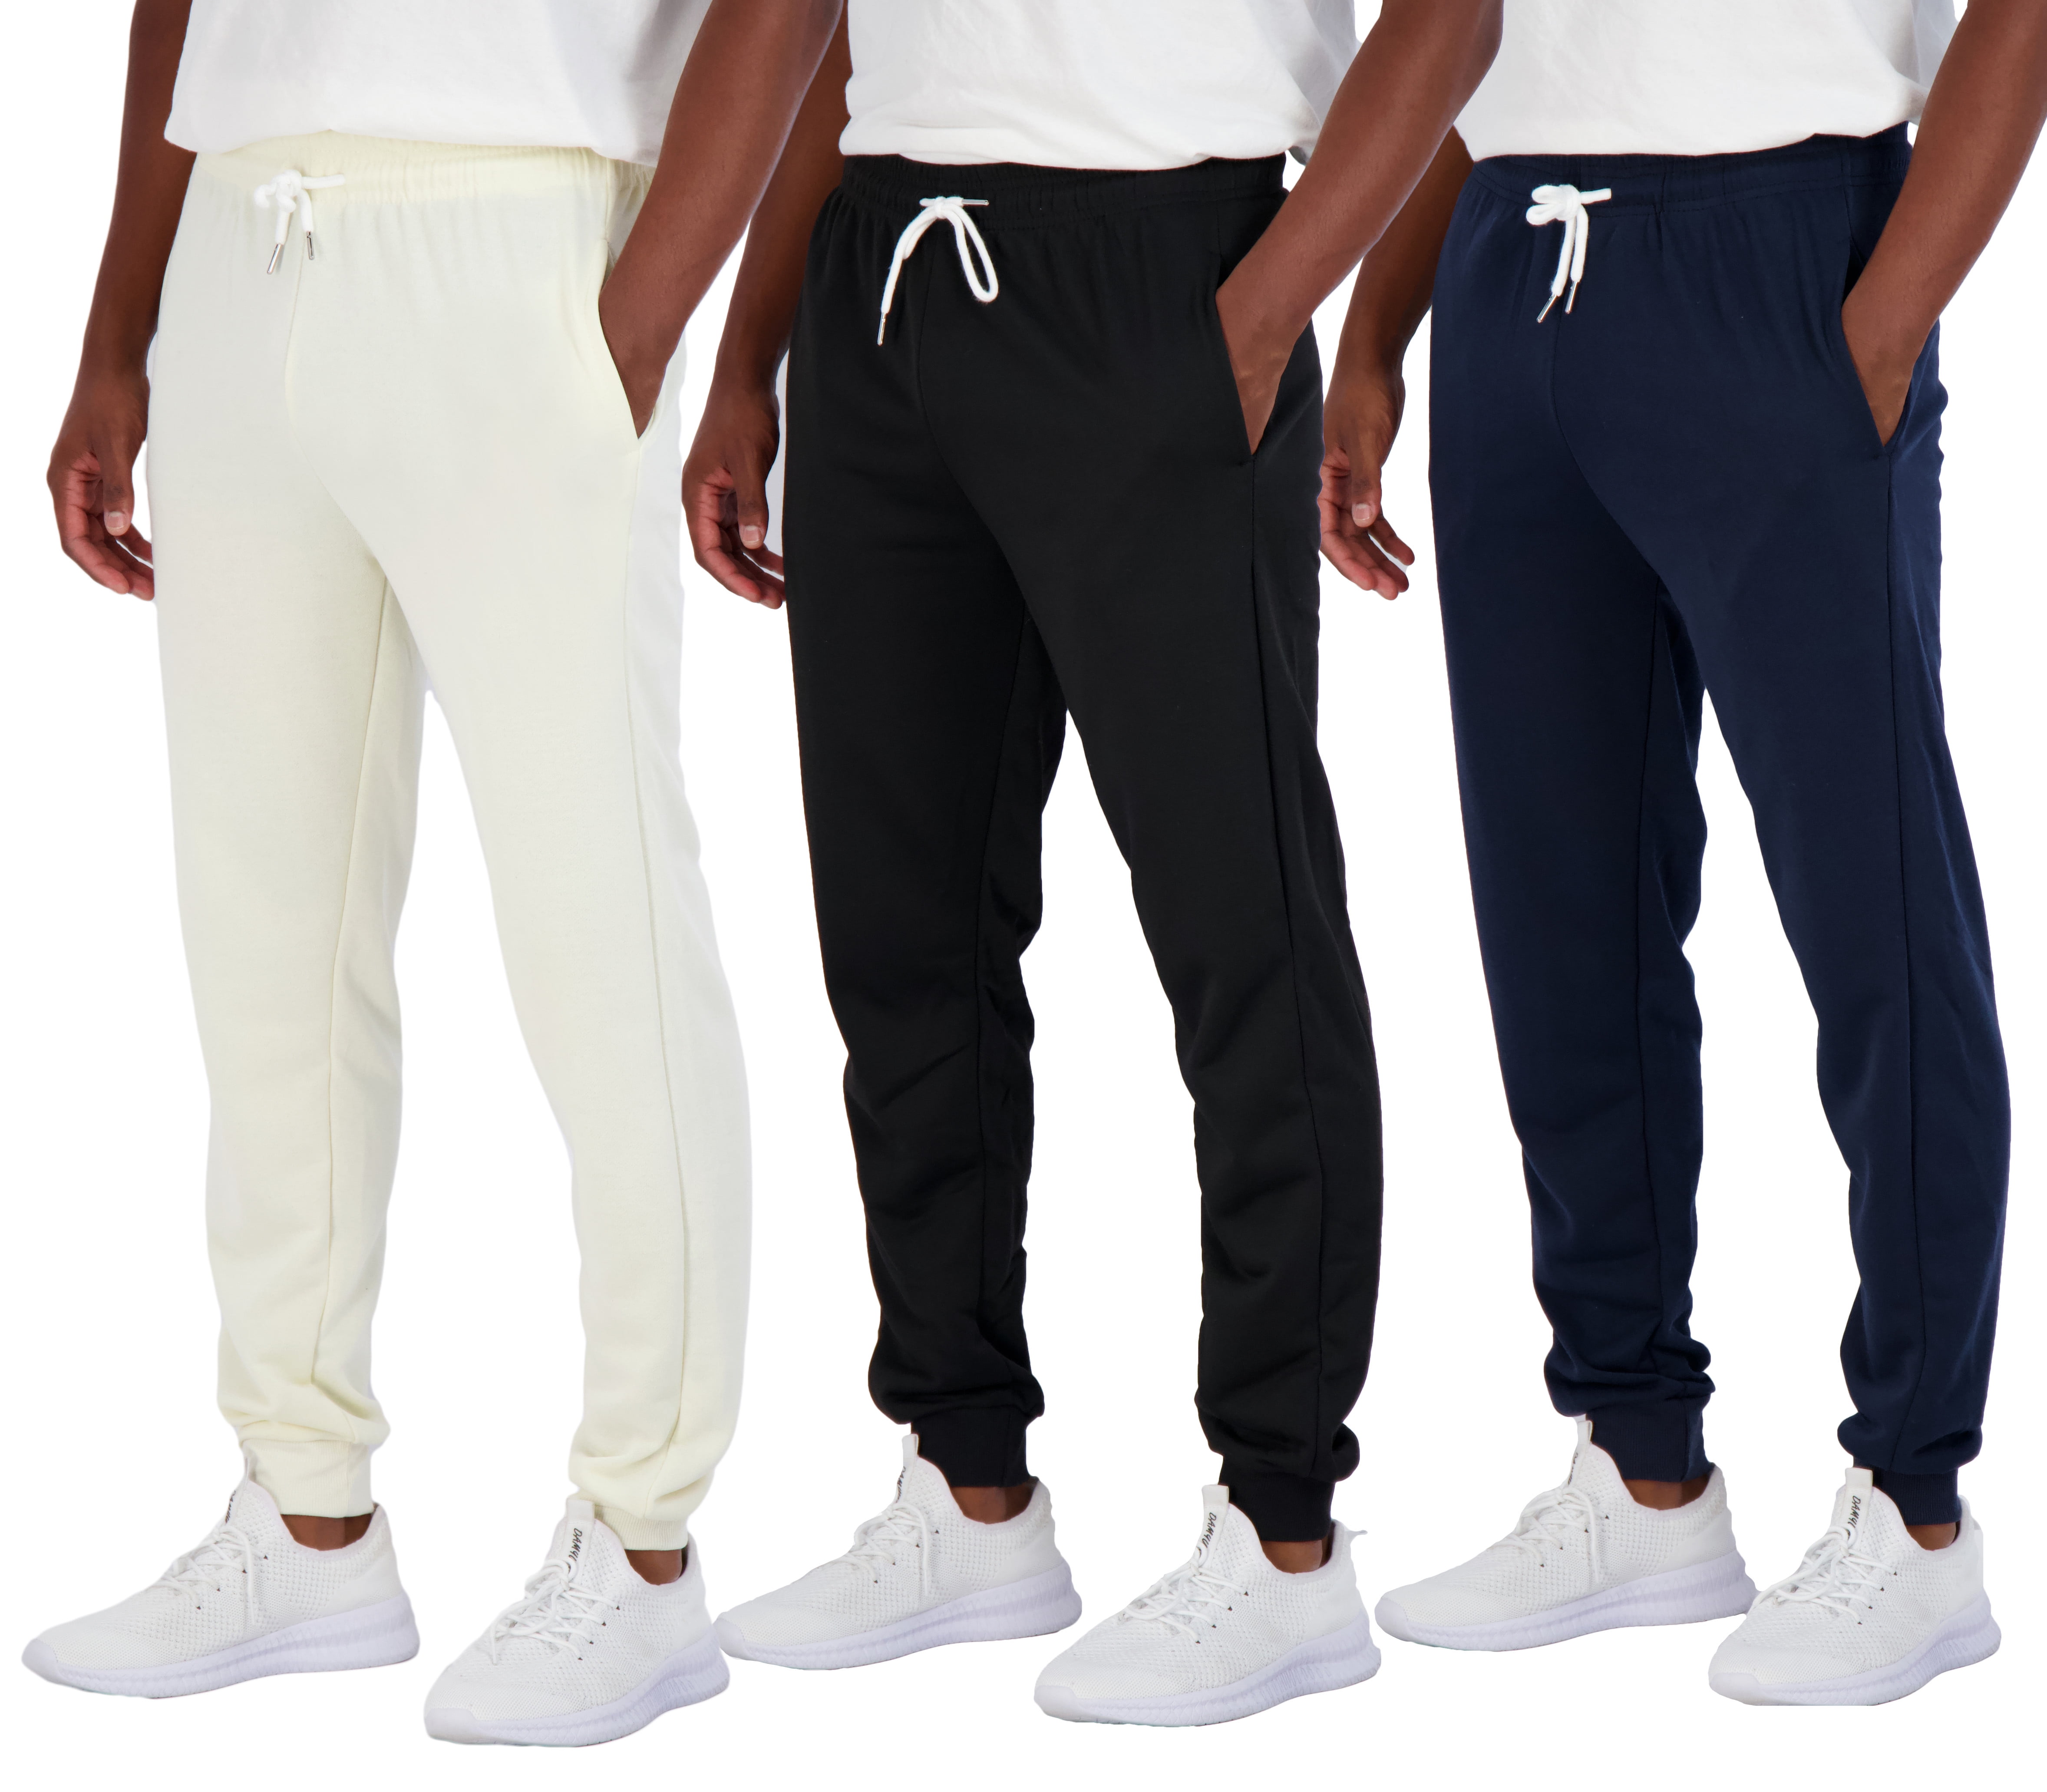 Real Essentials 3 Pack: Men's French Terry Fleece Active Casual Jogger ...